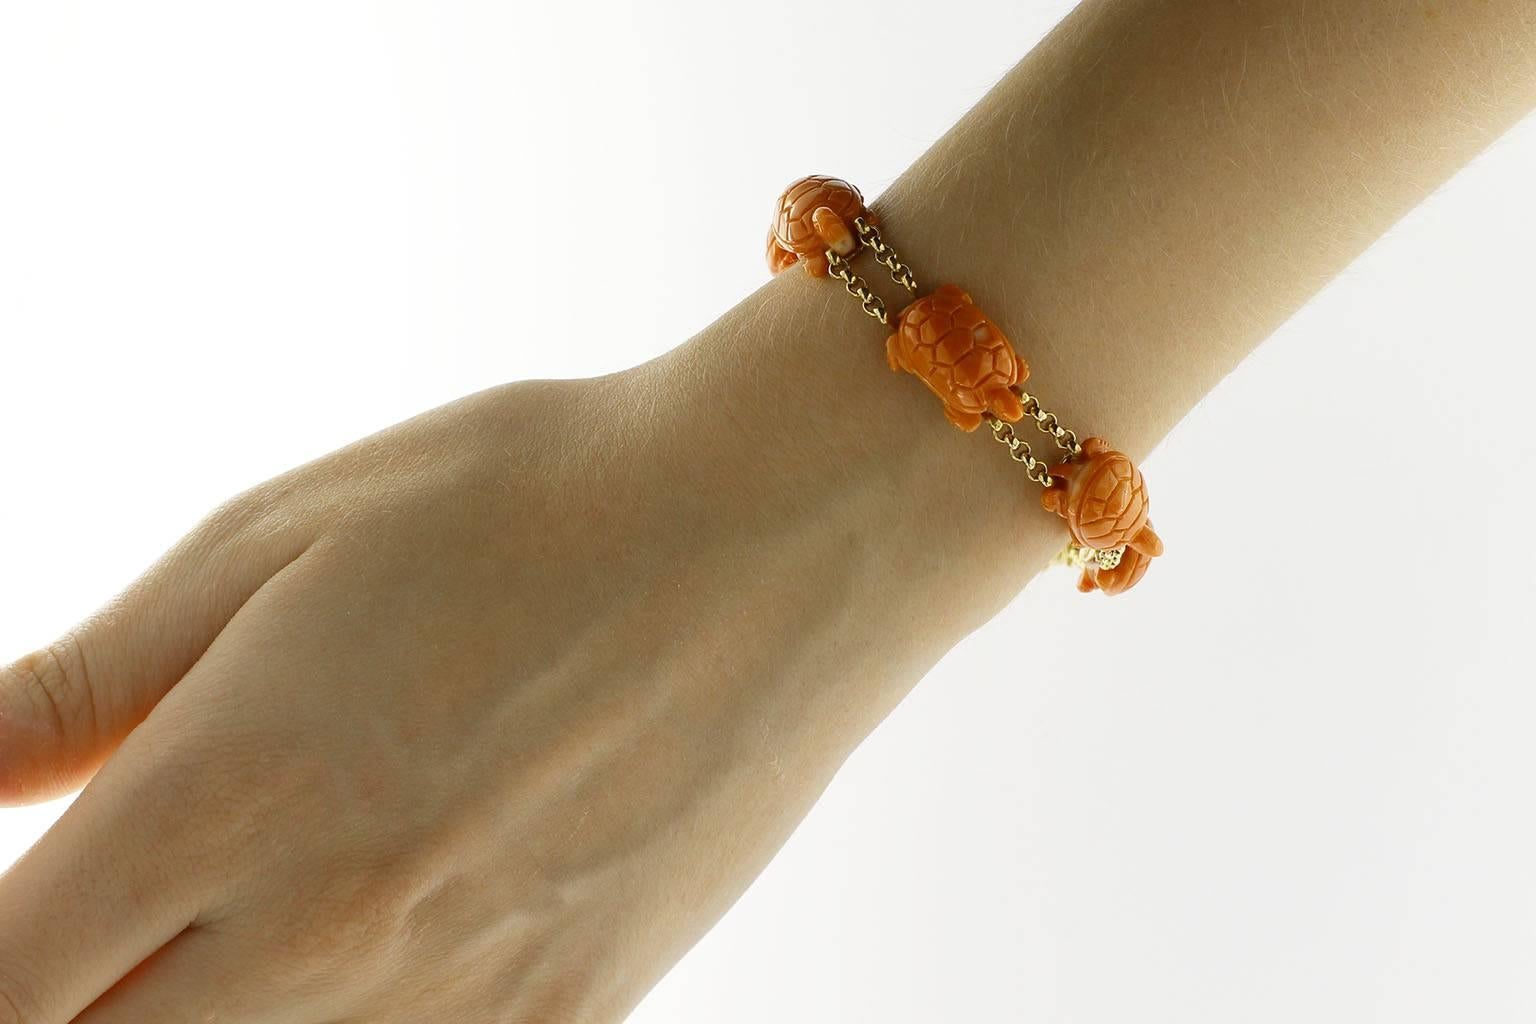 Jona design collection, hand crafted in Italy, 18 karat yellow gold chain bracelet with turtle shaped mediterranean coral links.

All Jona jewelry is new and has never been previously owned or worn. Each item will arrive at your door beautifully